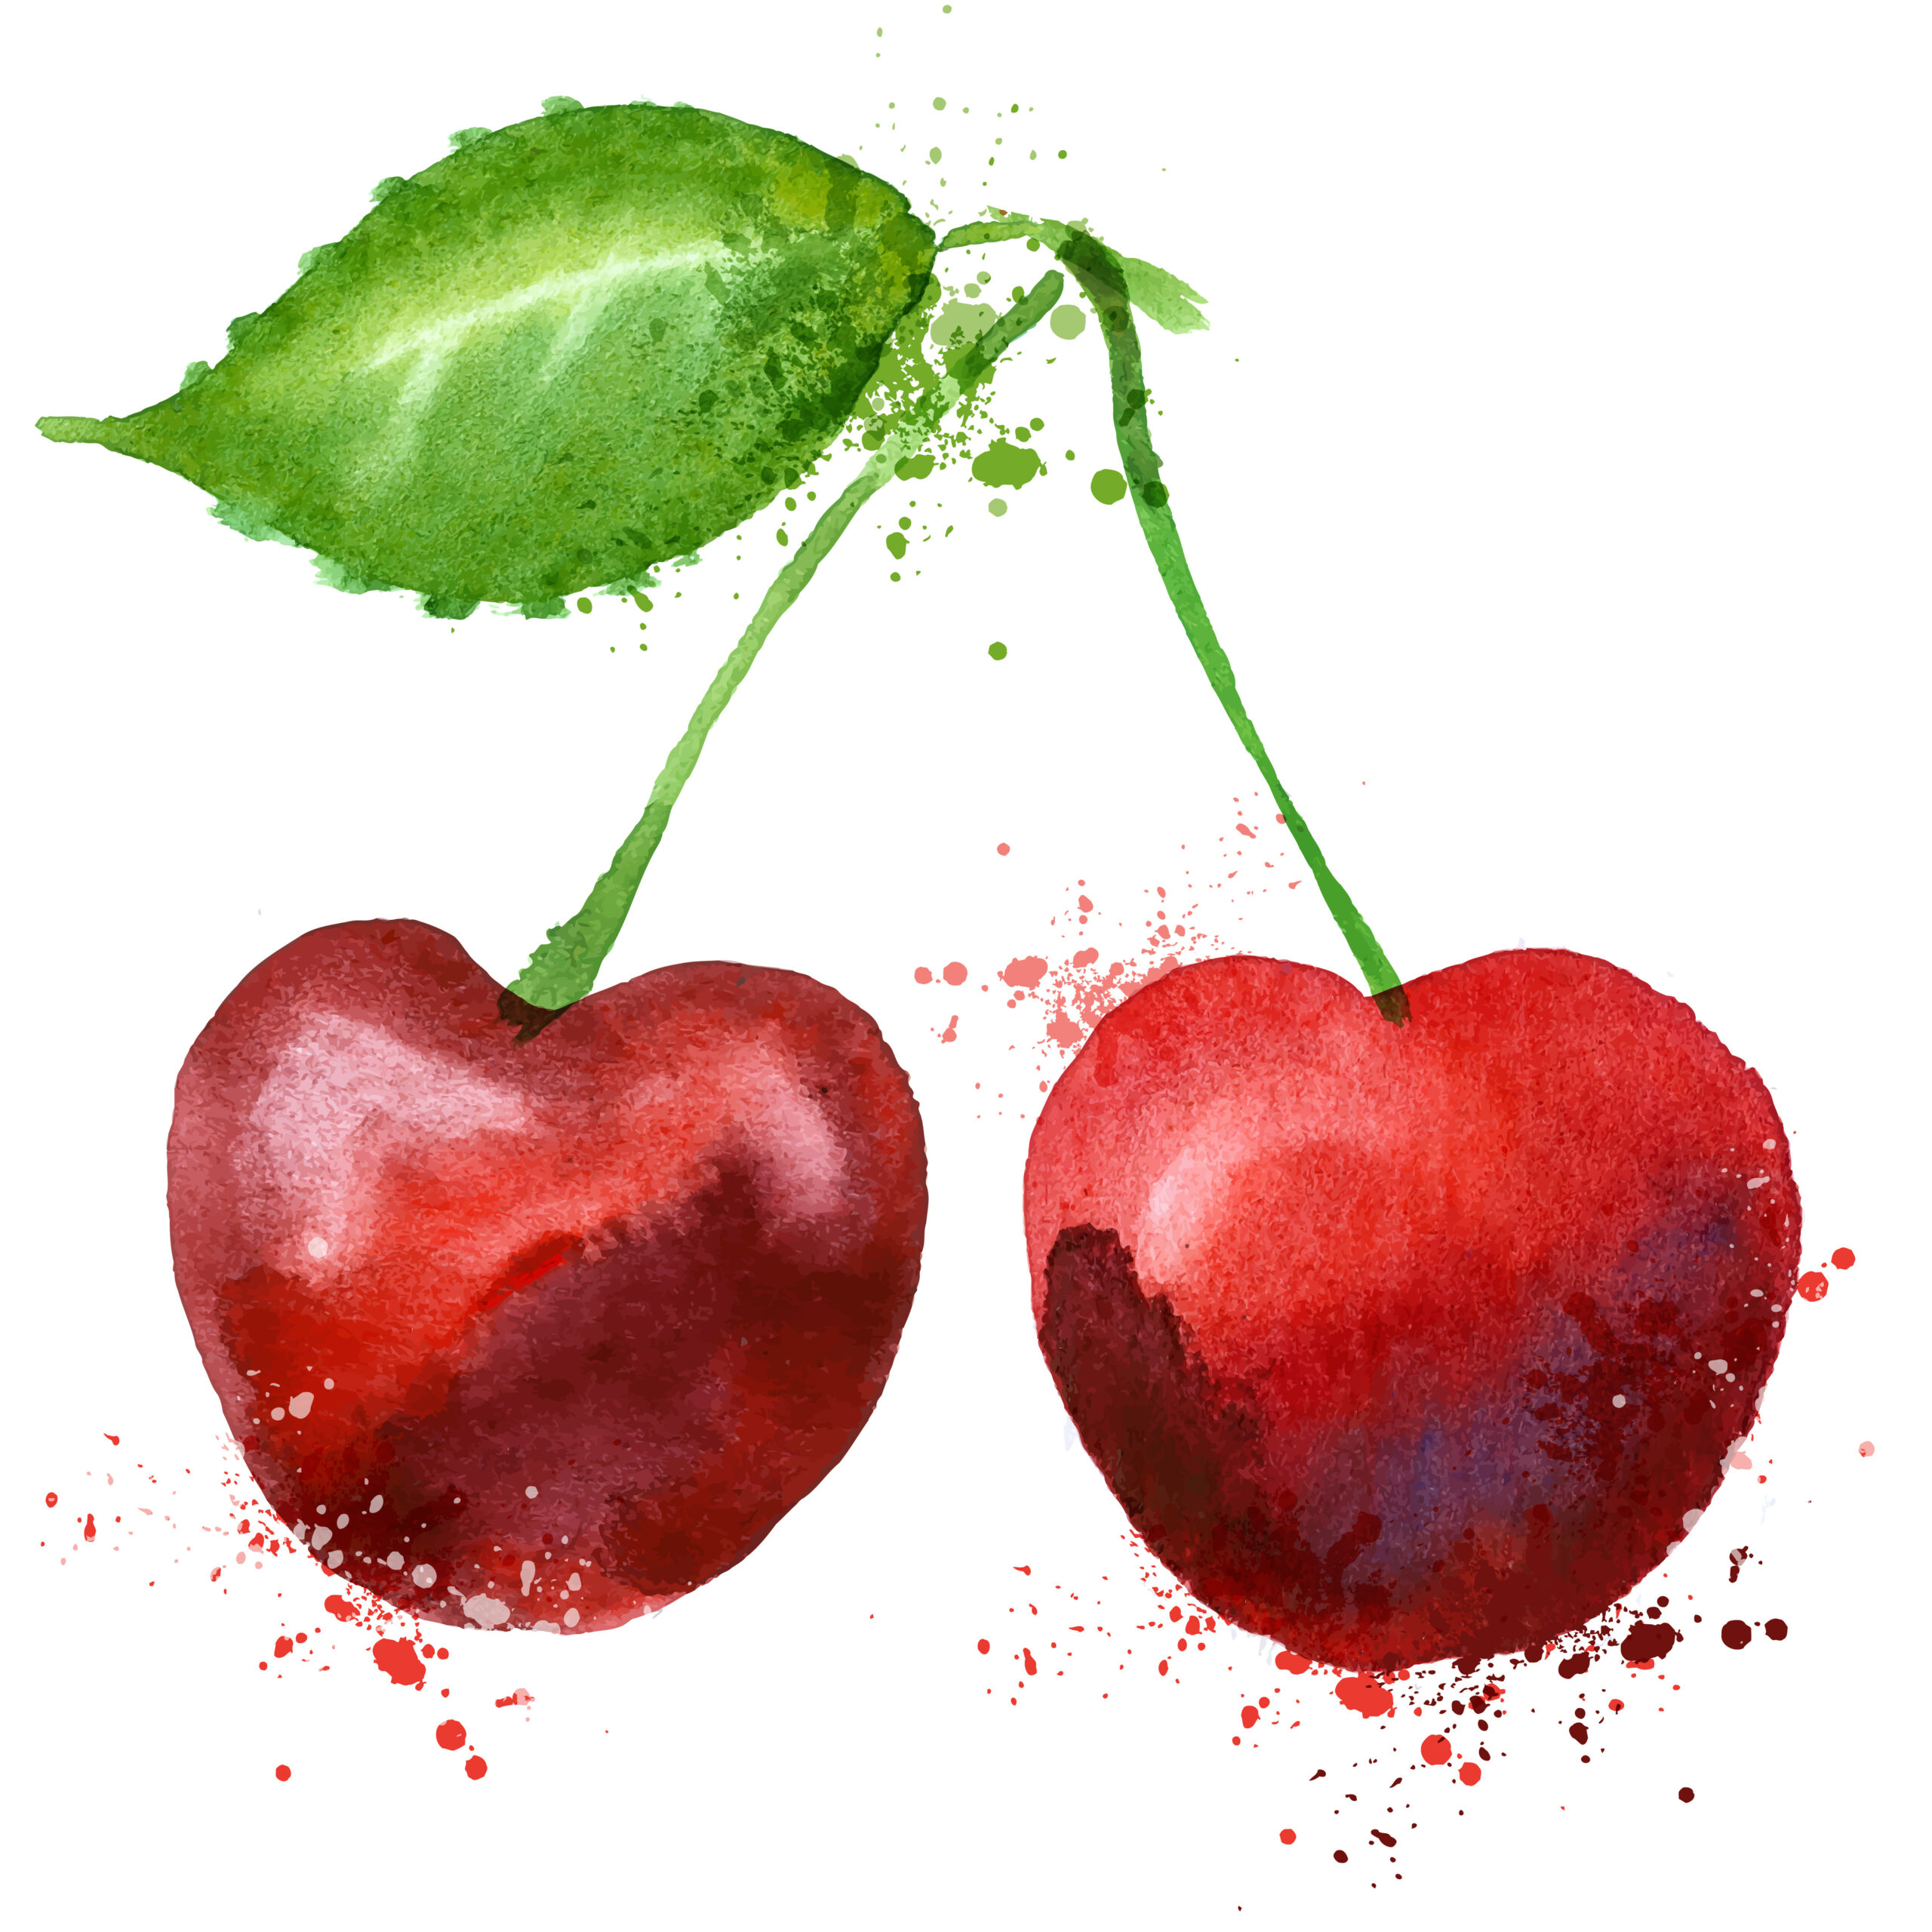 watercolor drawing. cherries on a white background. vector illustration